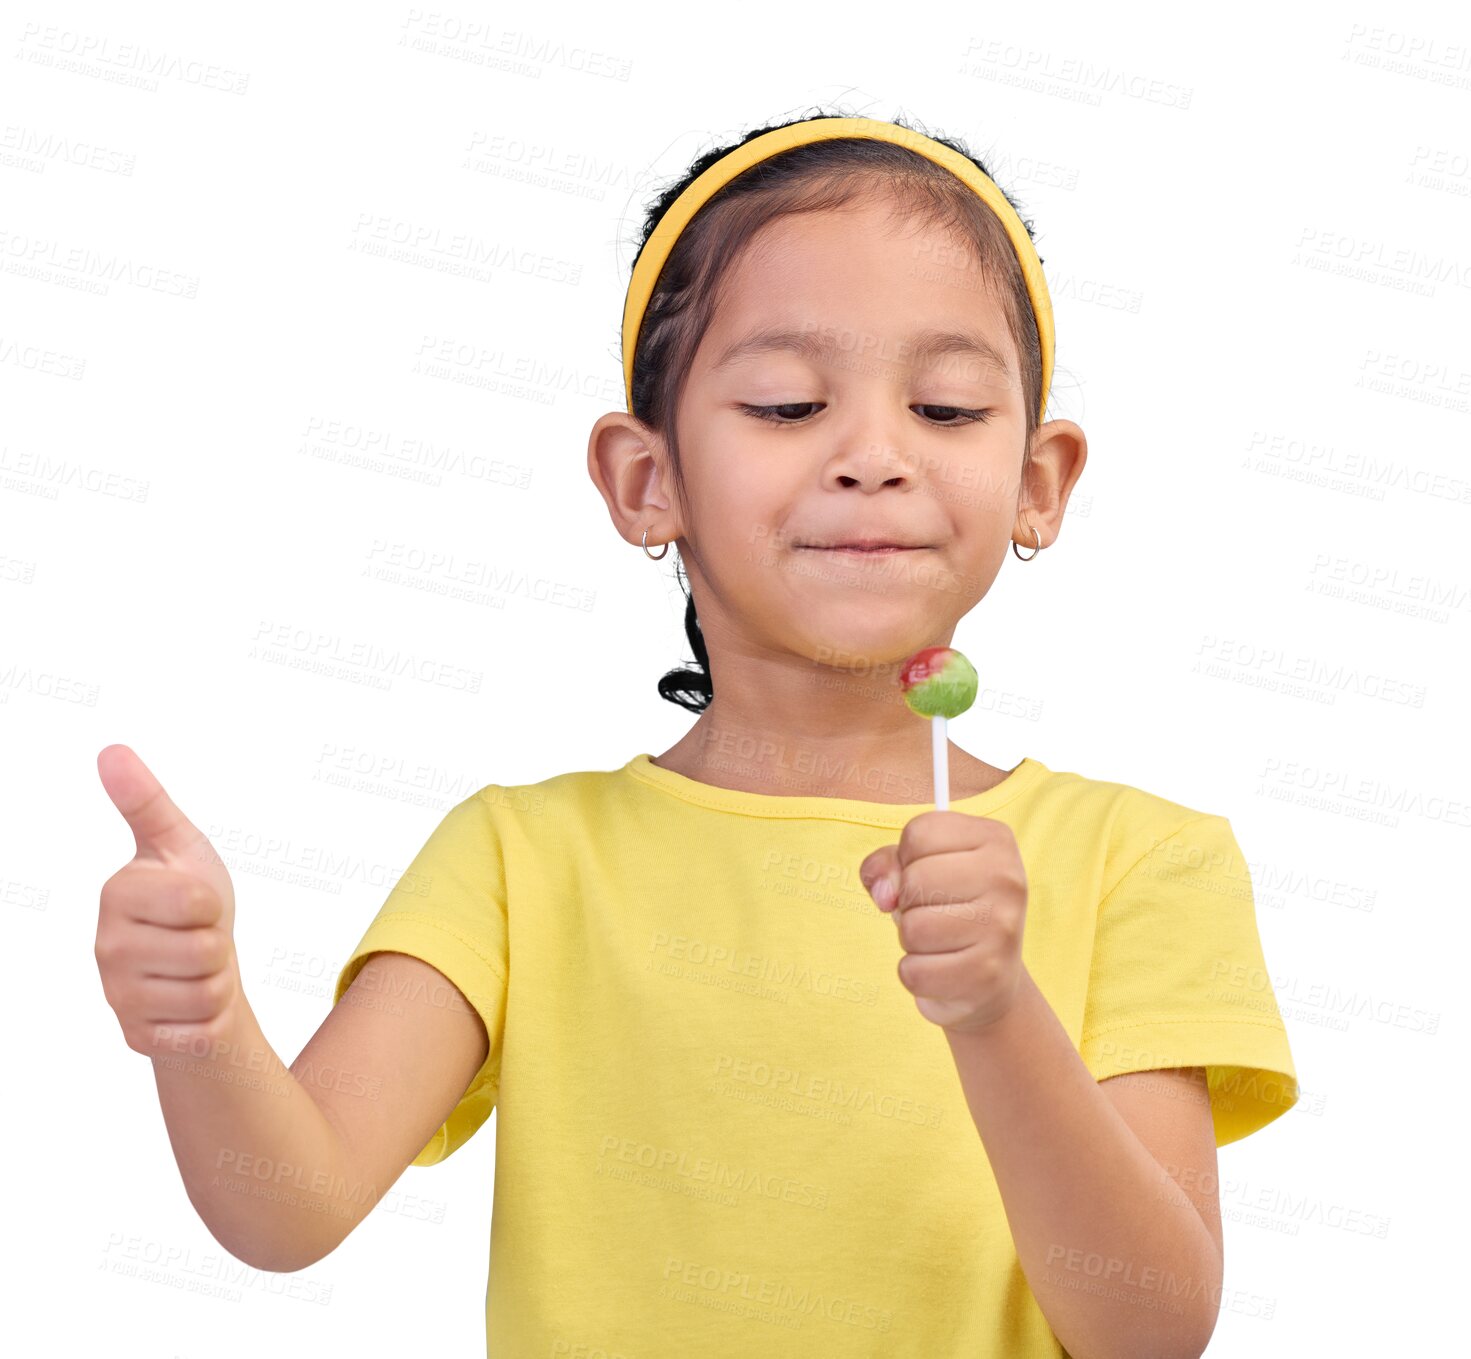 Buy stock photo Candy, happy and a child with a lollipop and thumbs up with a smile and review. Excited, thinking and girl kid with hand sign eating sweets, sugar or treats isolated on a transparent, png background